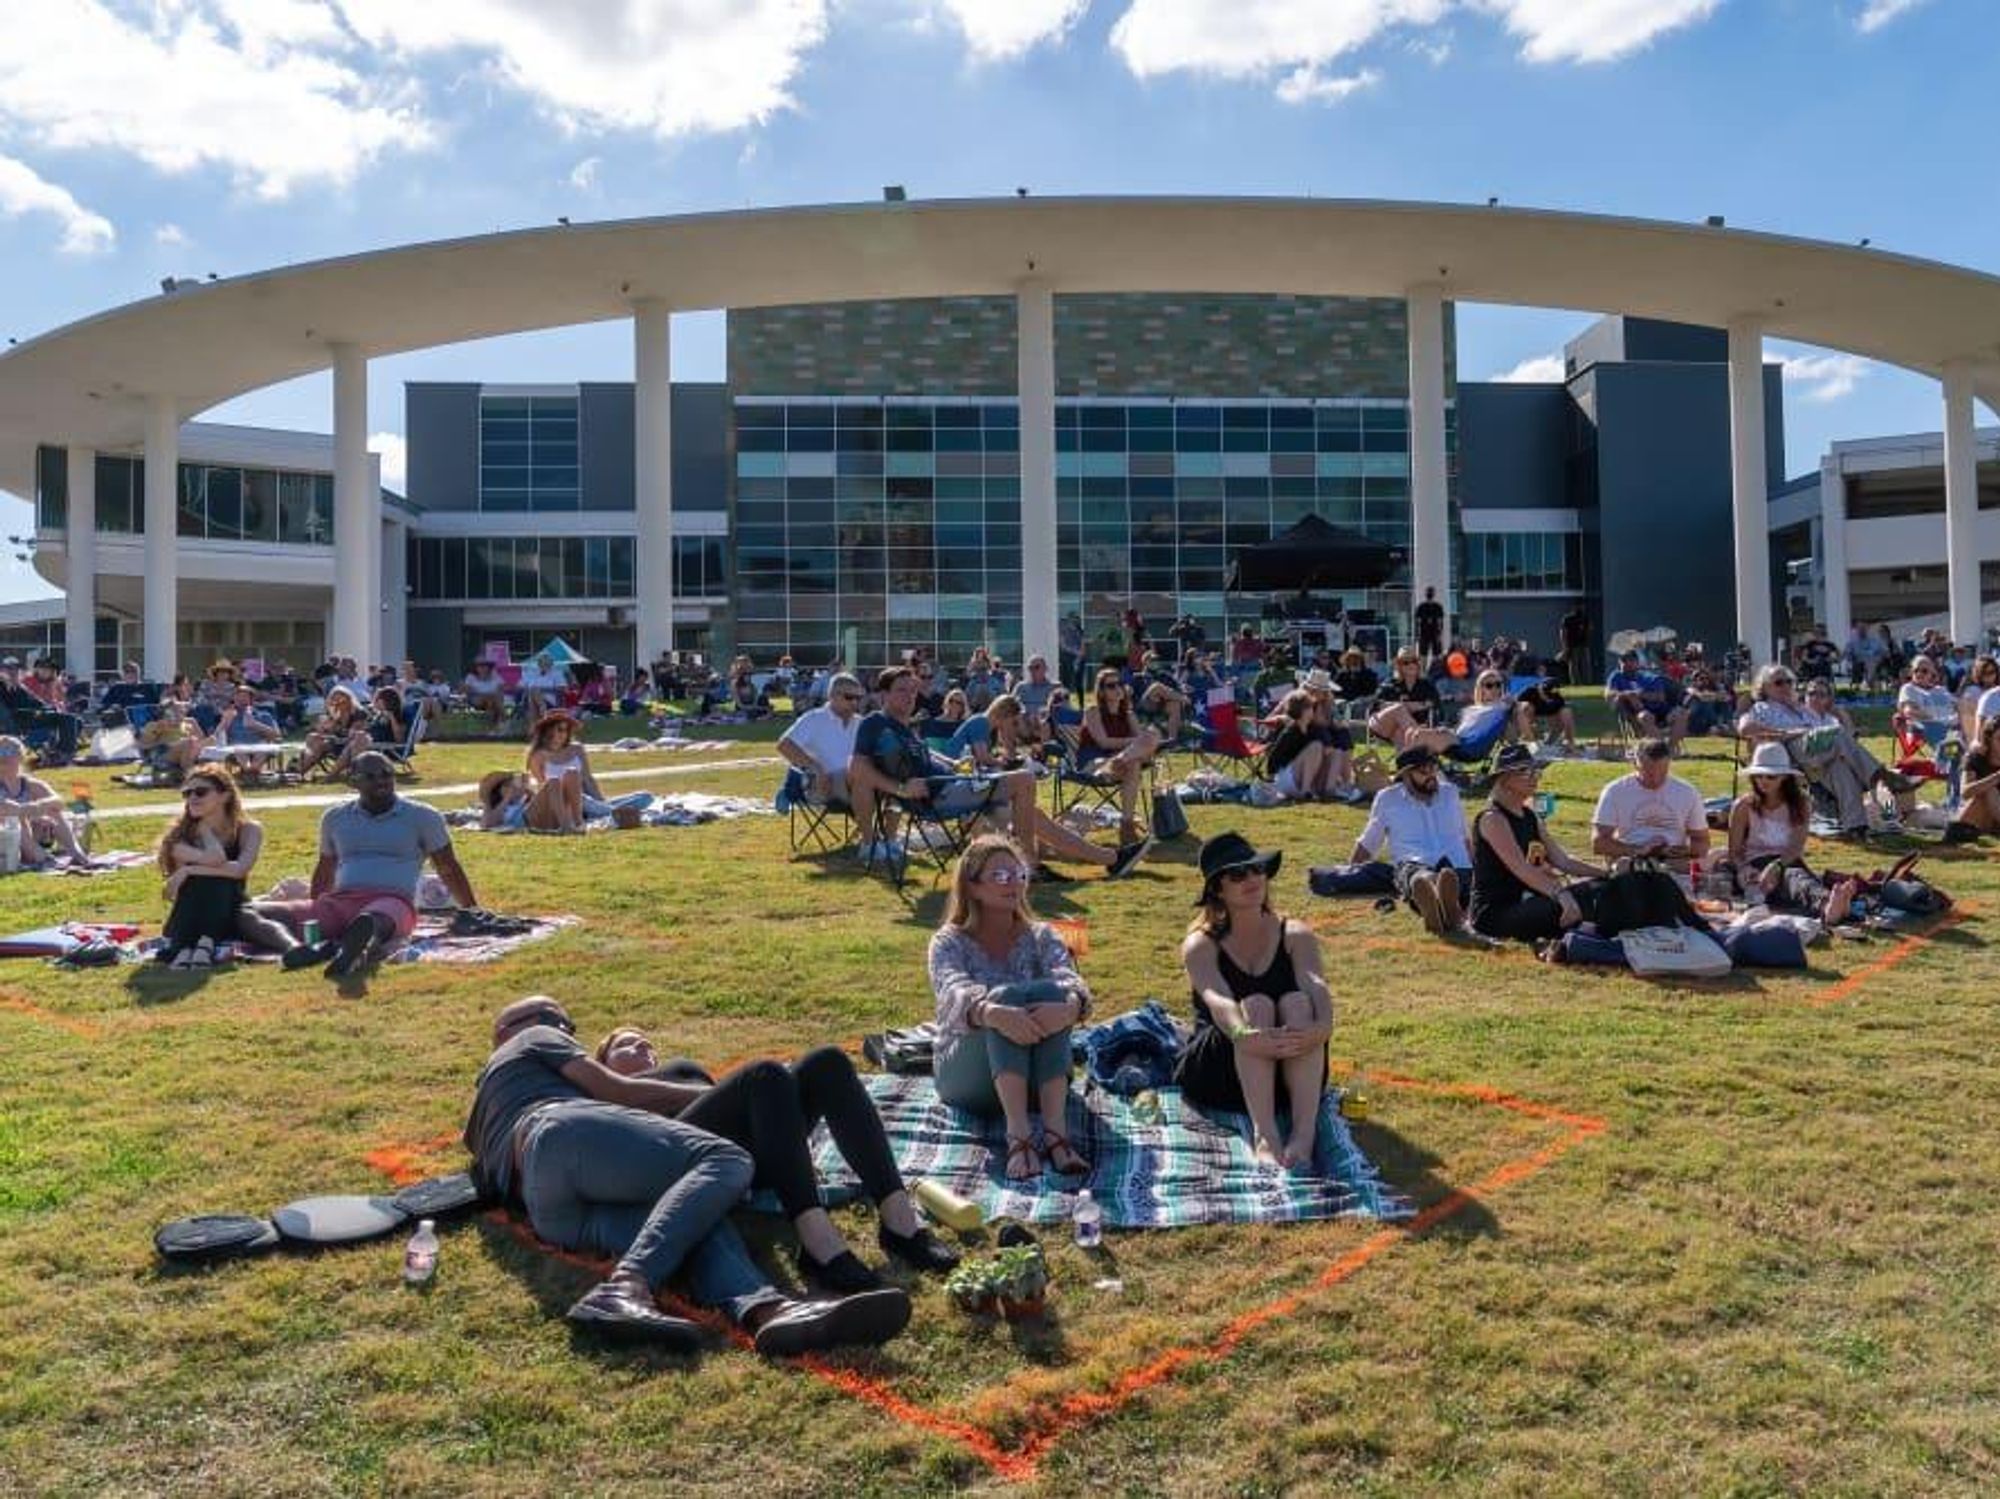 Free outdoor music series returns to Austin's Long Center lawn all